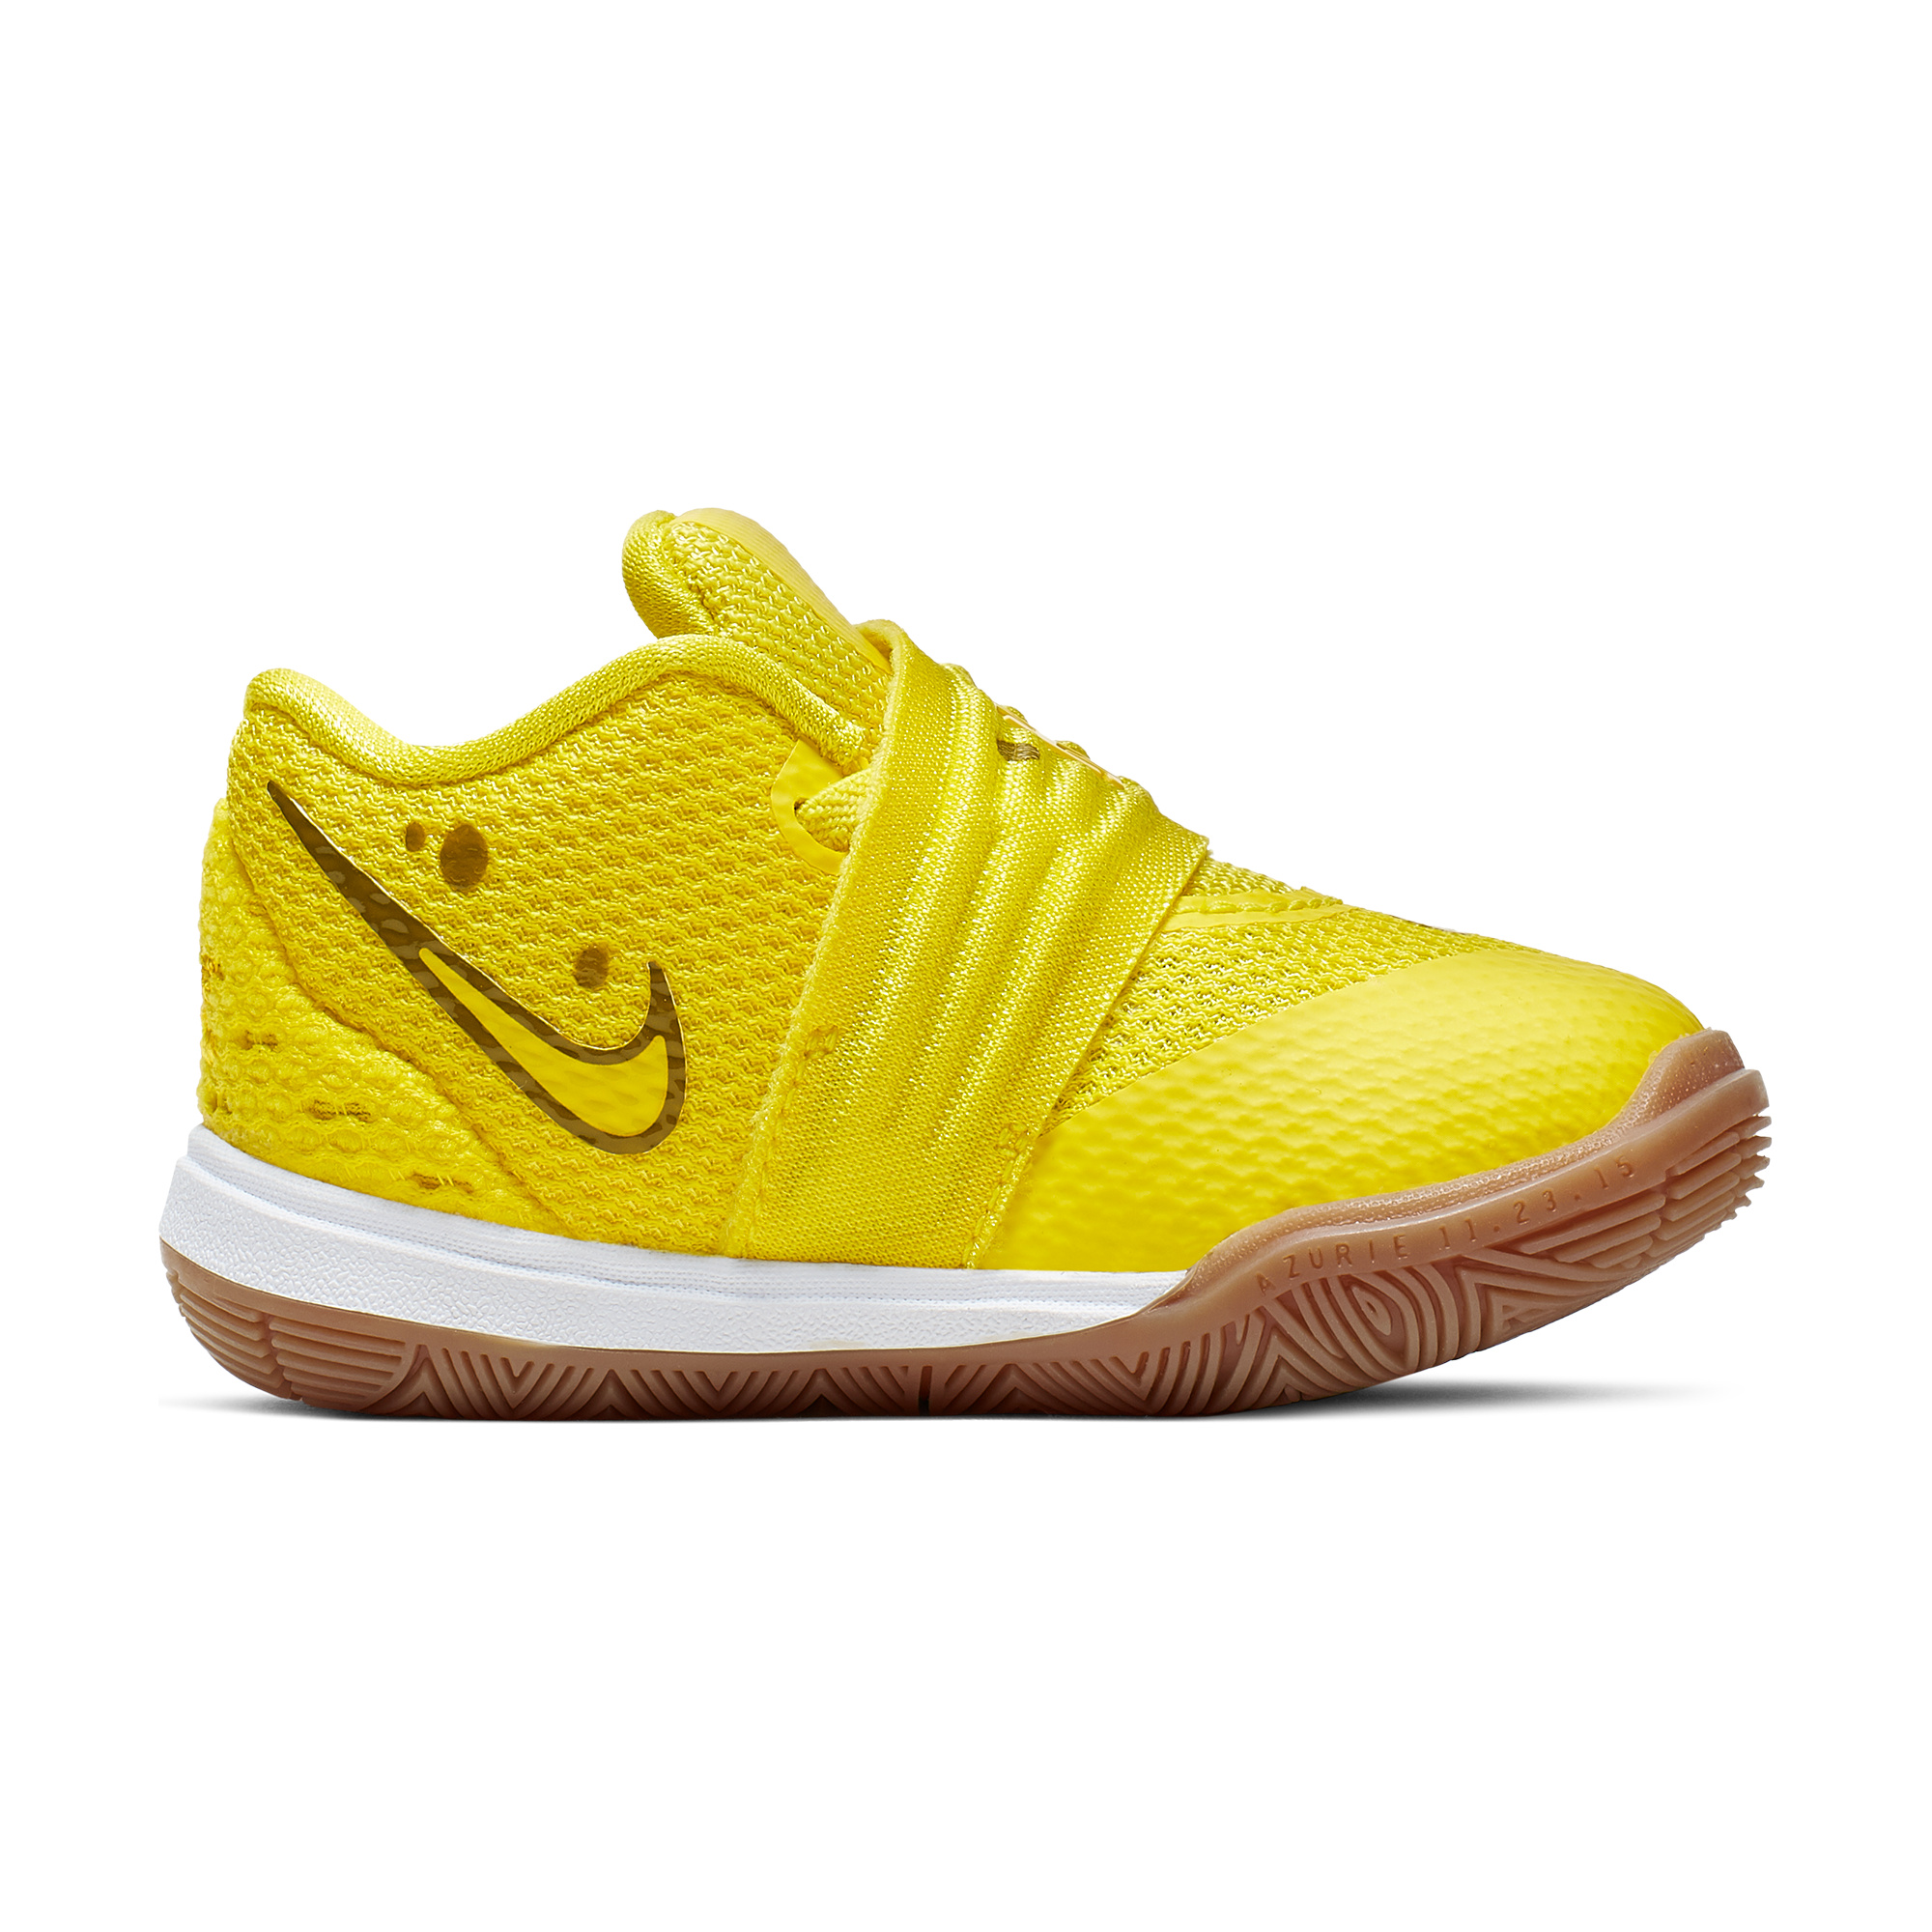  Clearance sale Nike Kyrie 5 SBSP Basketball Shoes For